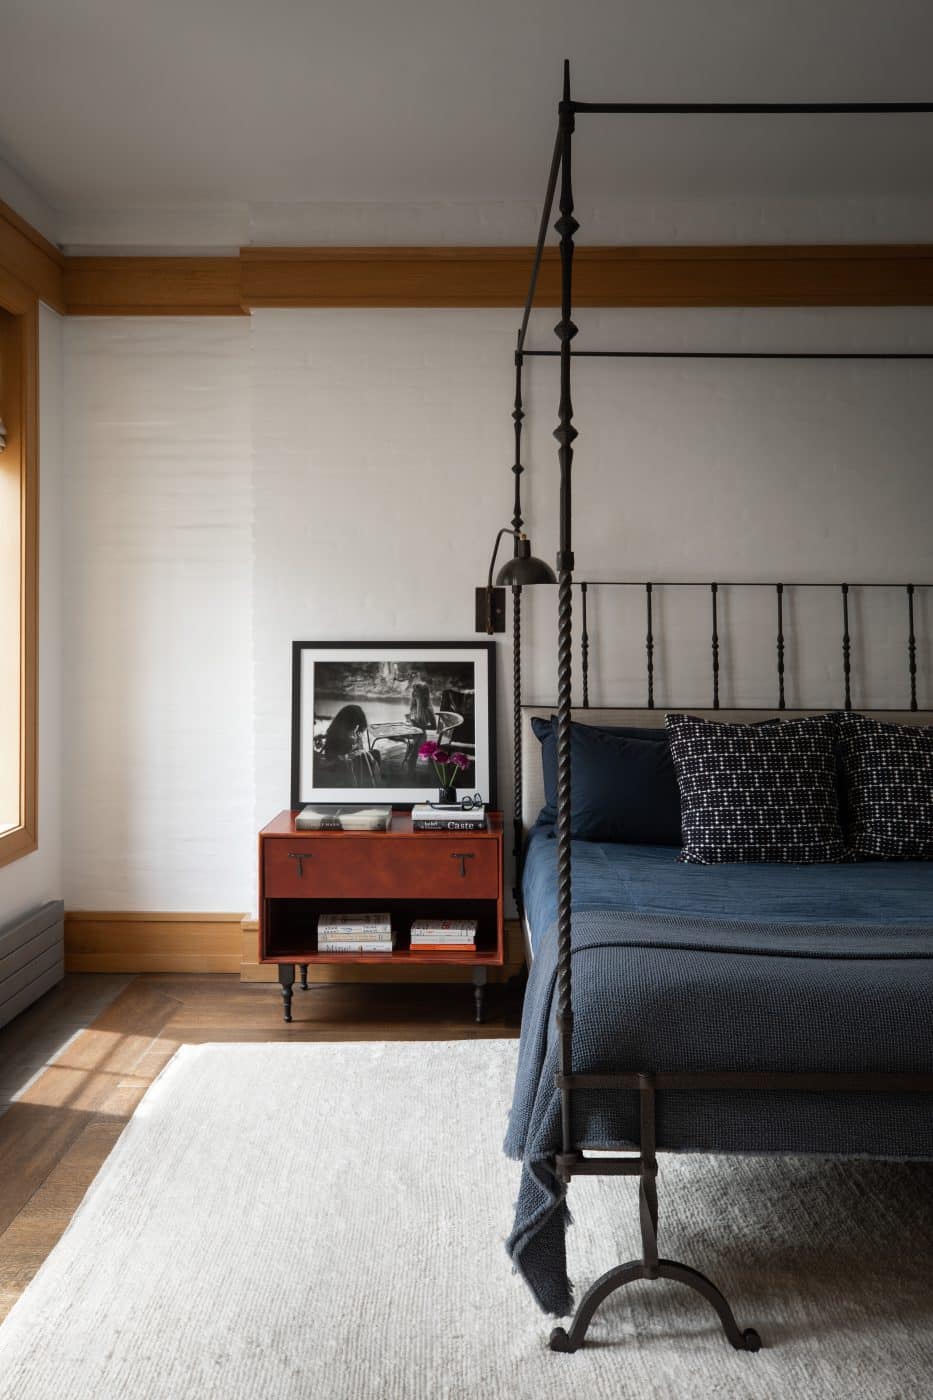 Primary bedroom designed by ASHE LEANDRO featuring an iron bed and reupholstered headboard